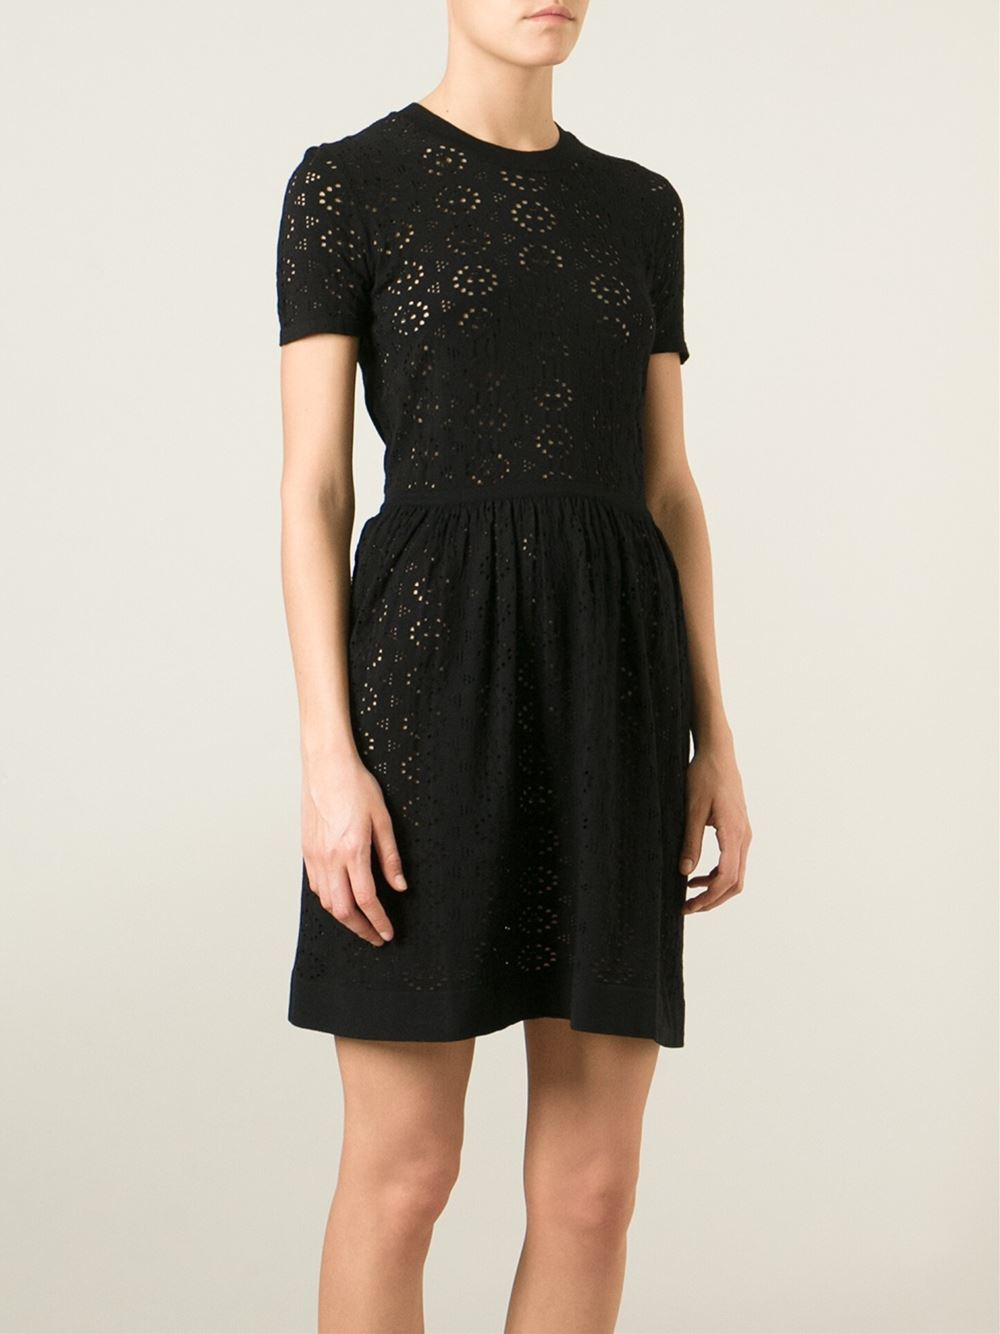 See By Chloé Perforated Dress in Black | Lyst